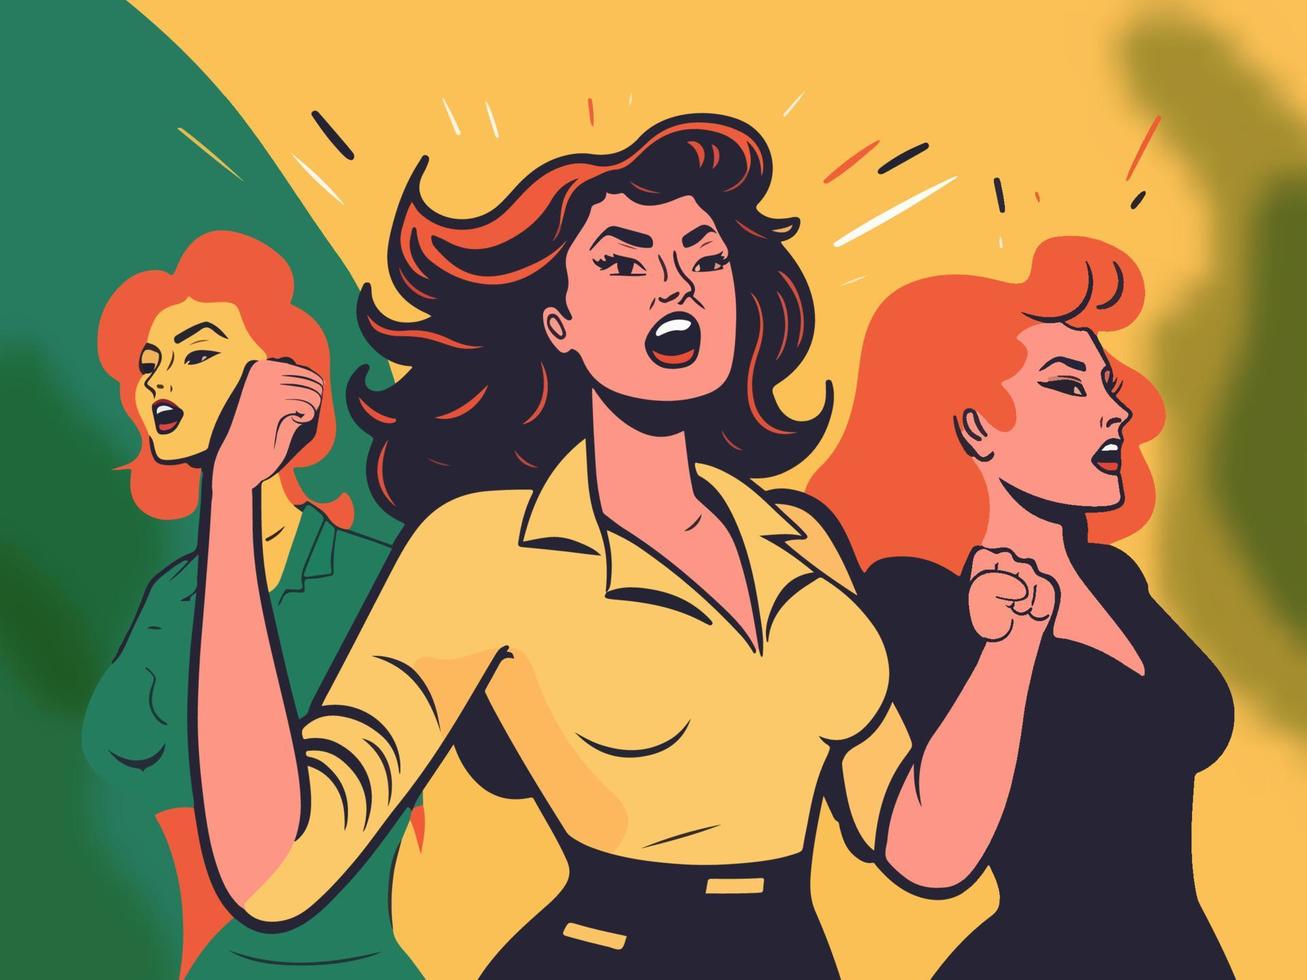 Fashionable Young Women Characters Screaming On Chrome Yellow And Green Background. Happy Women's Day Concept. vector